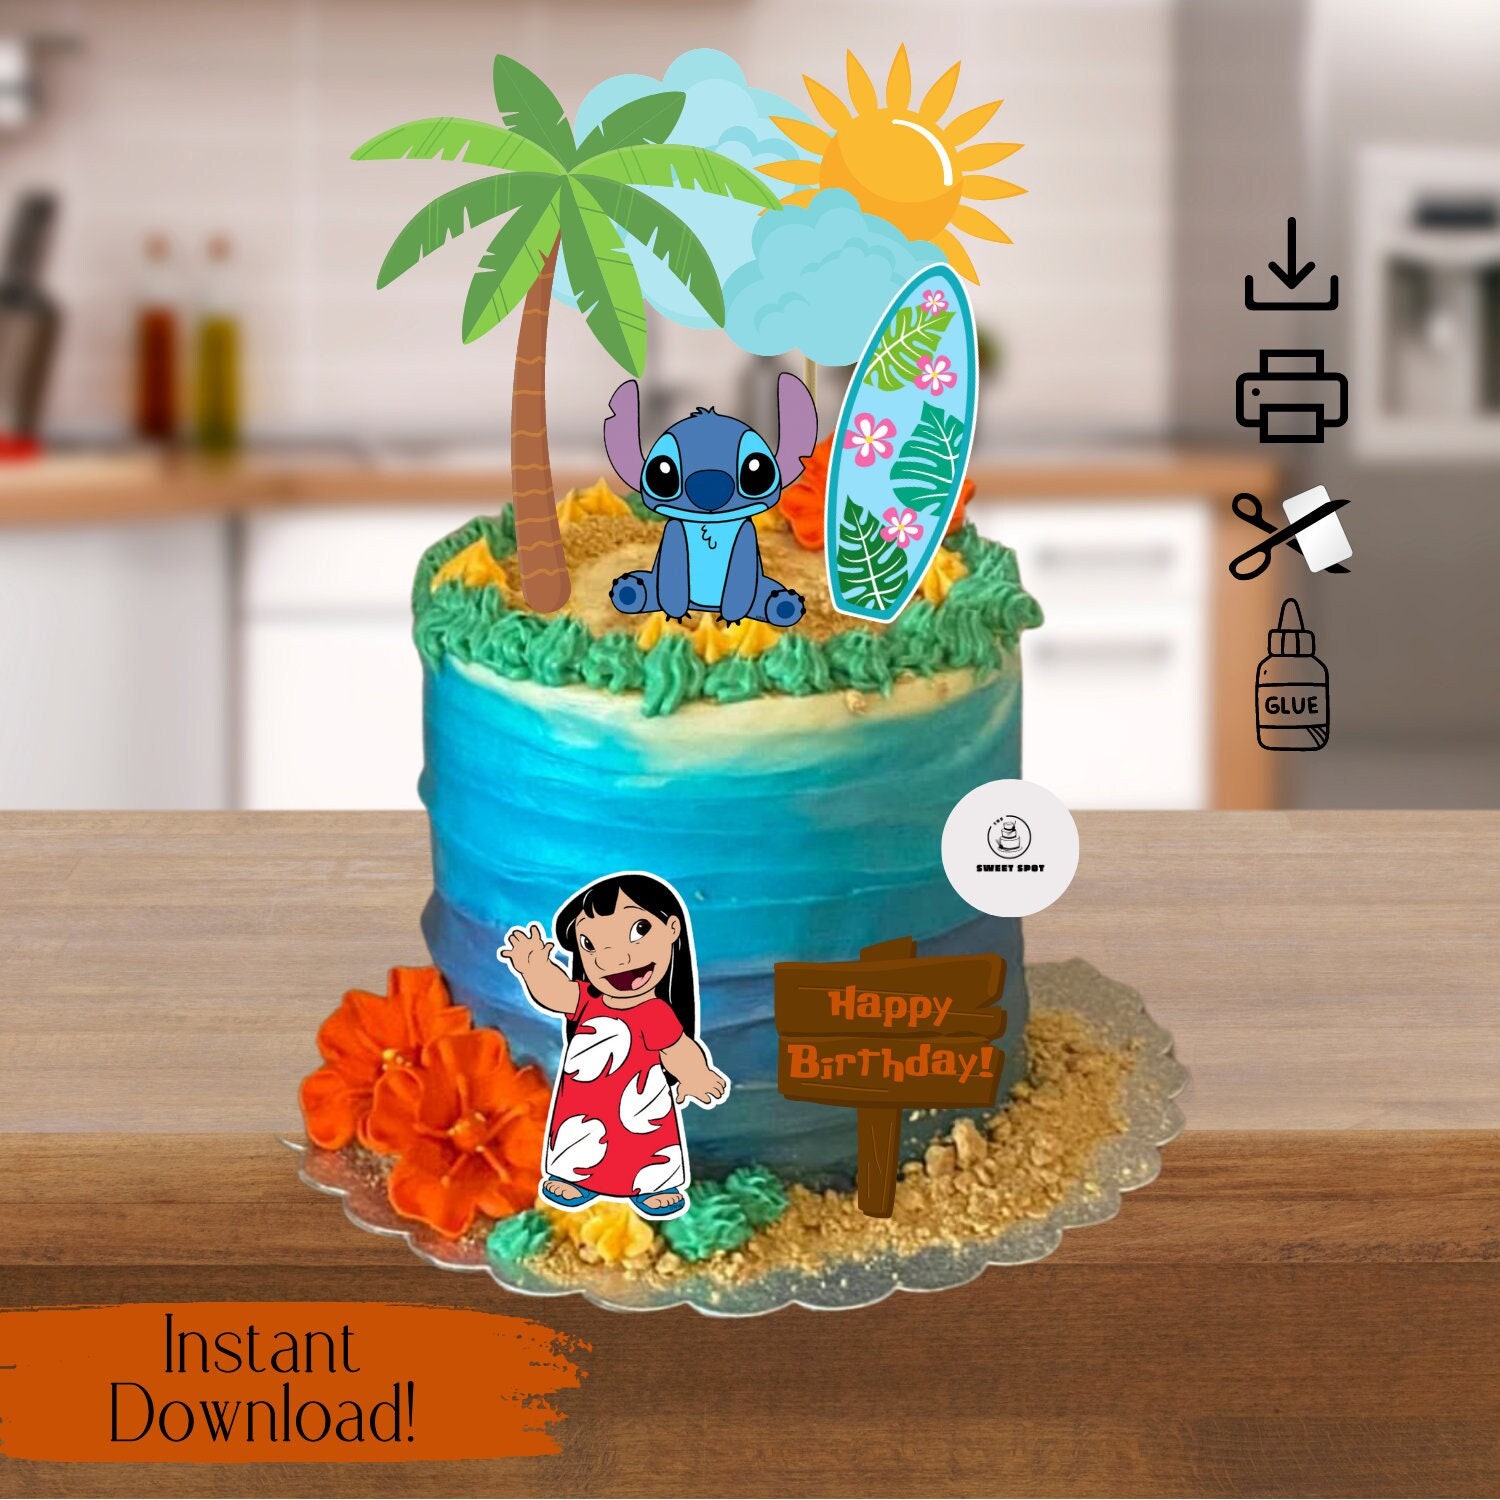 Disney Lilo and Stitch Cake topper for a very lucky birthday girl